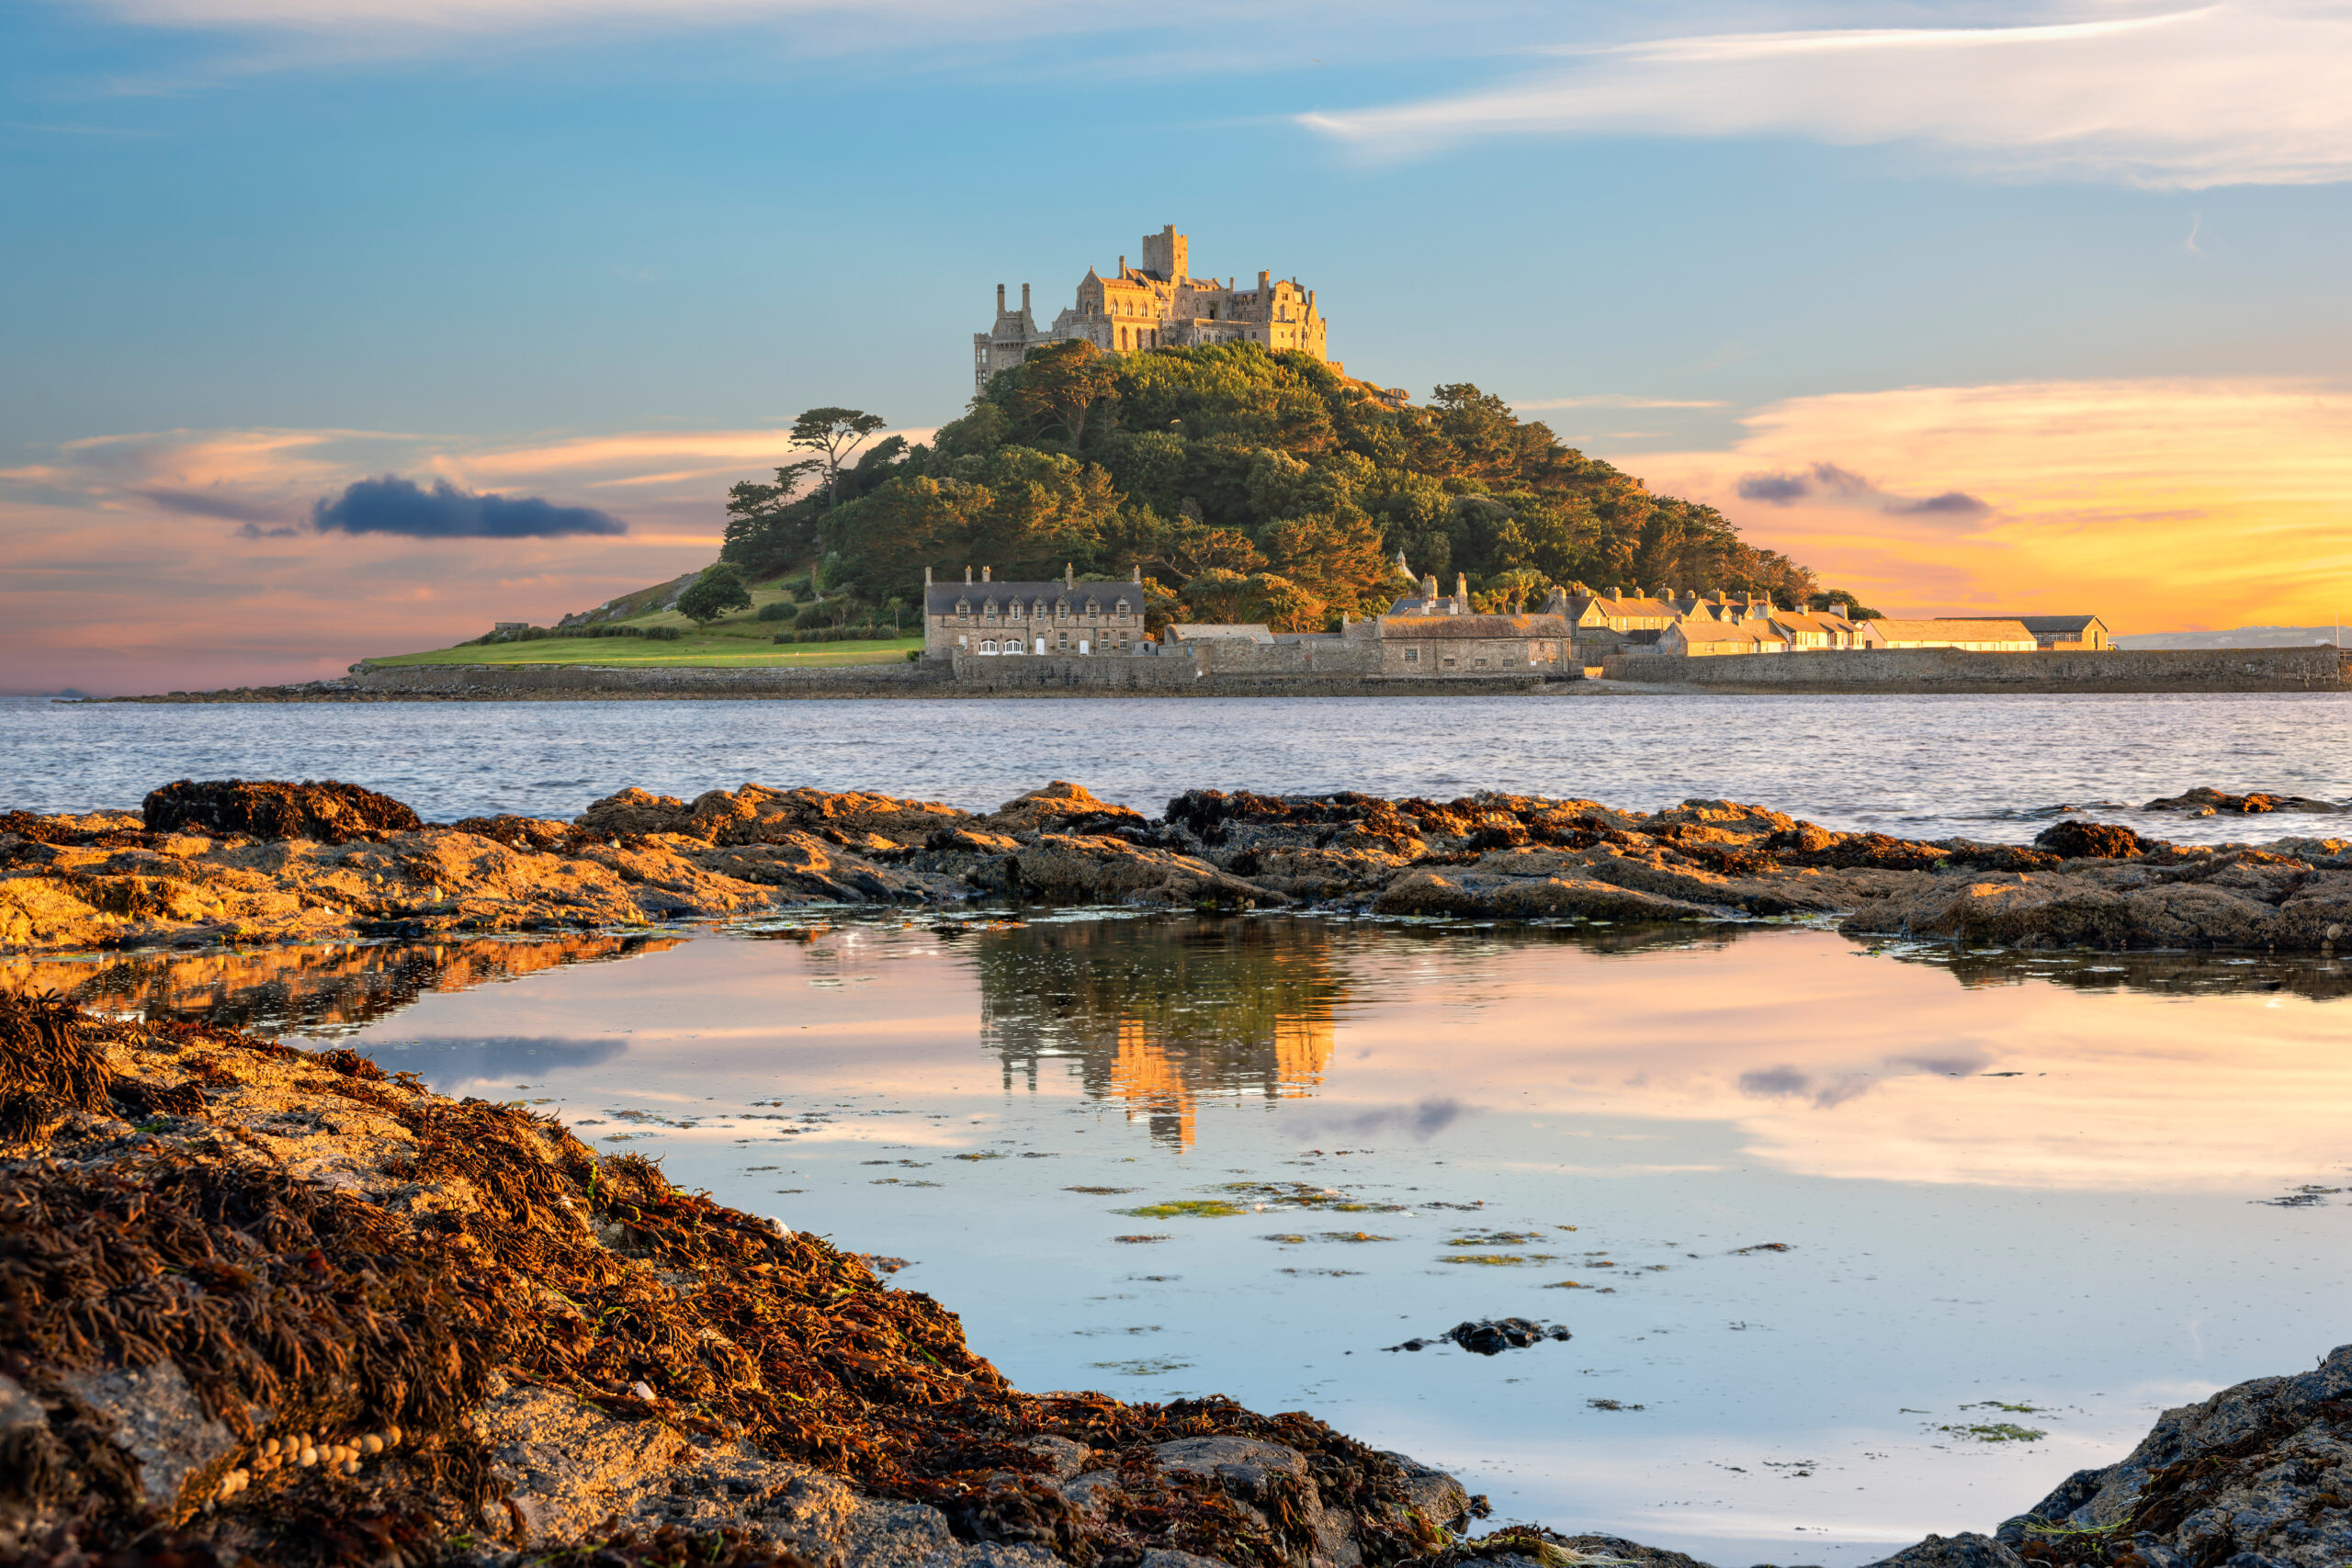 View of St Michael's Mount in Cornwall at sunset